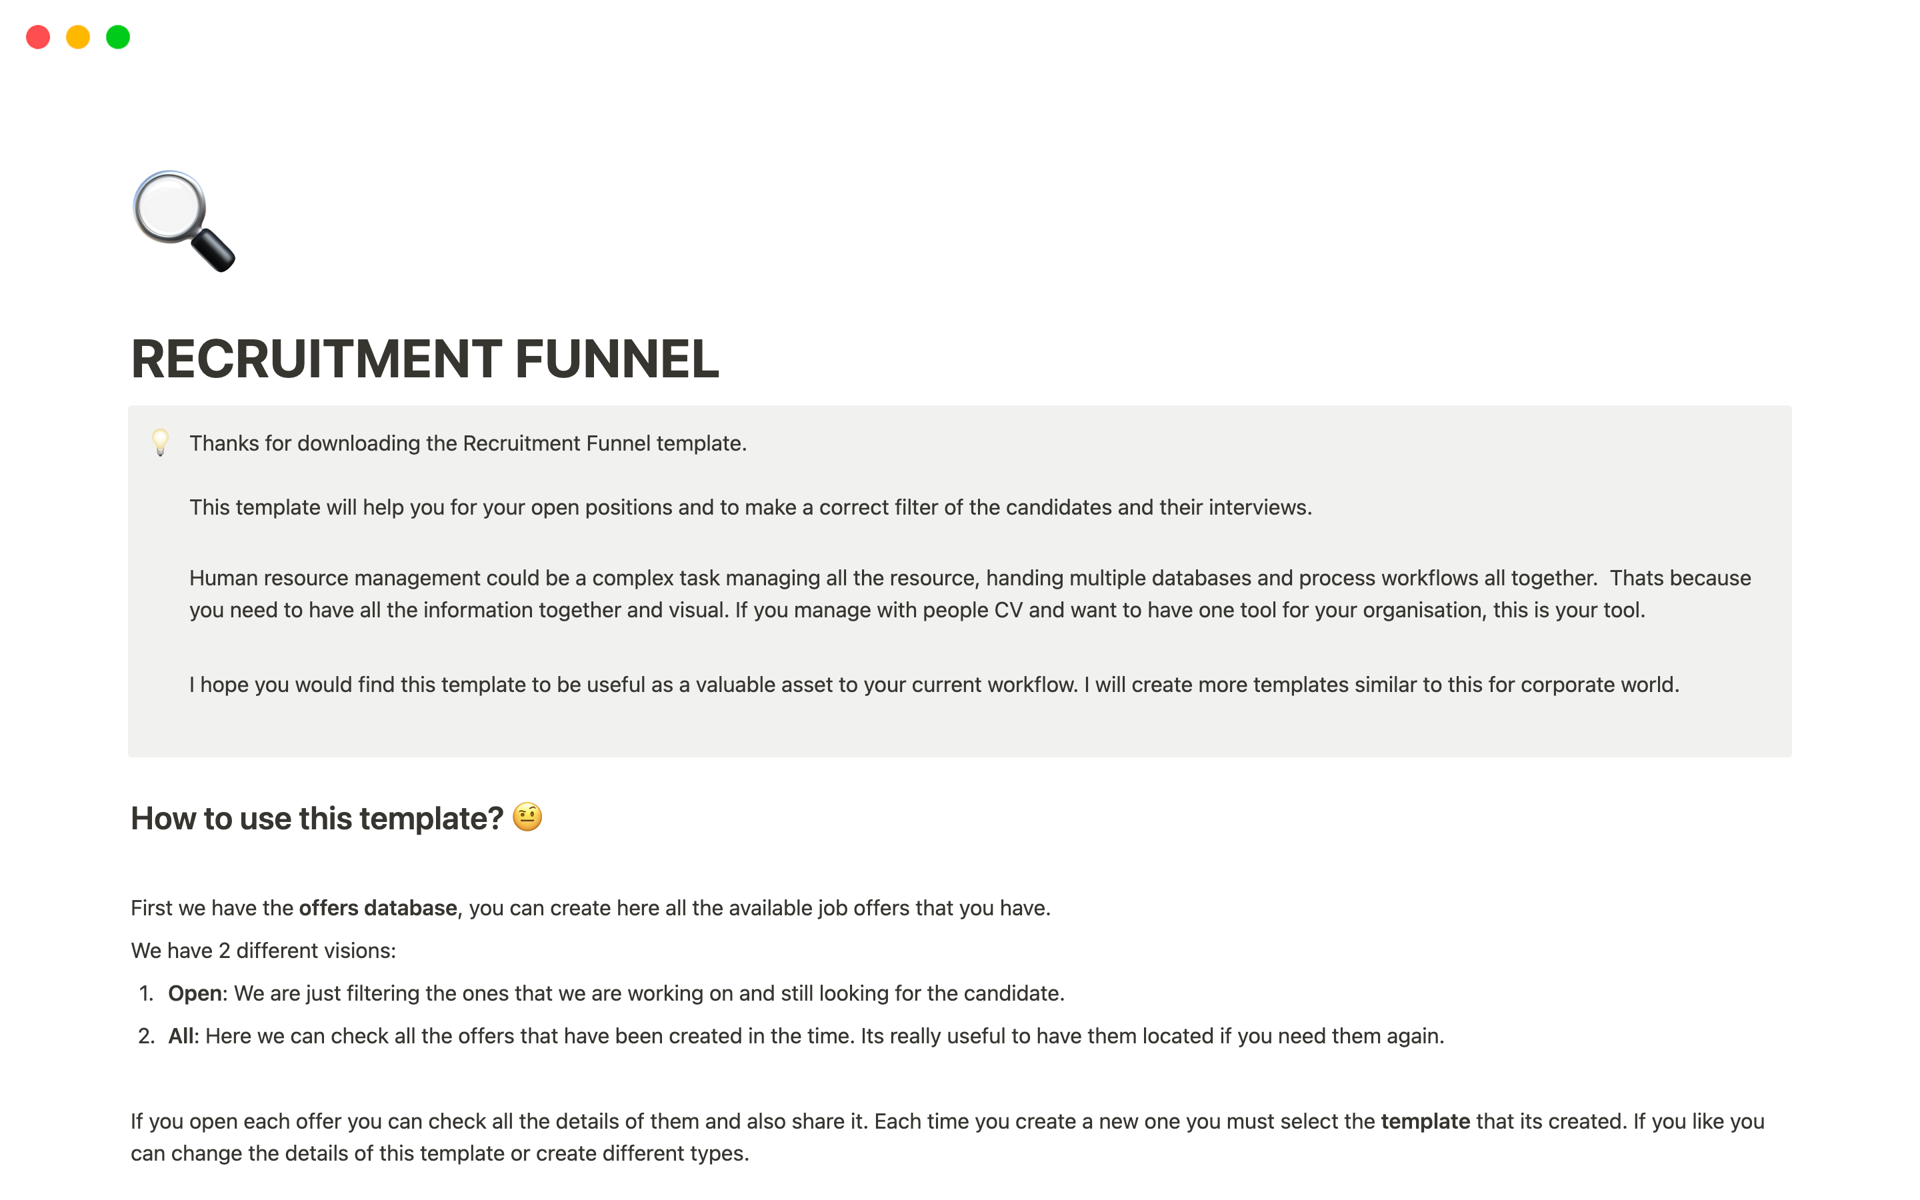 A template preview for RECRUITMENT FUNNEL